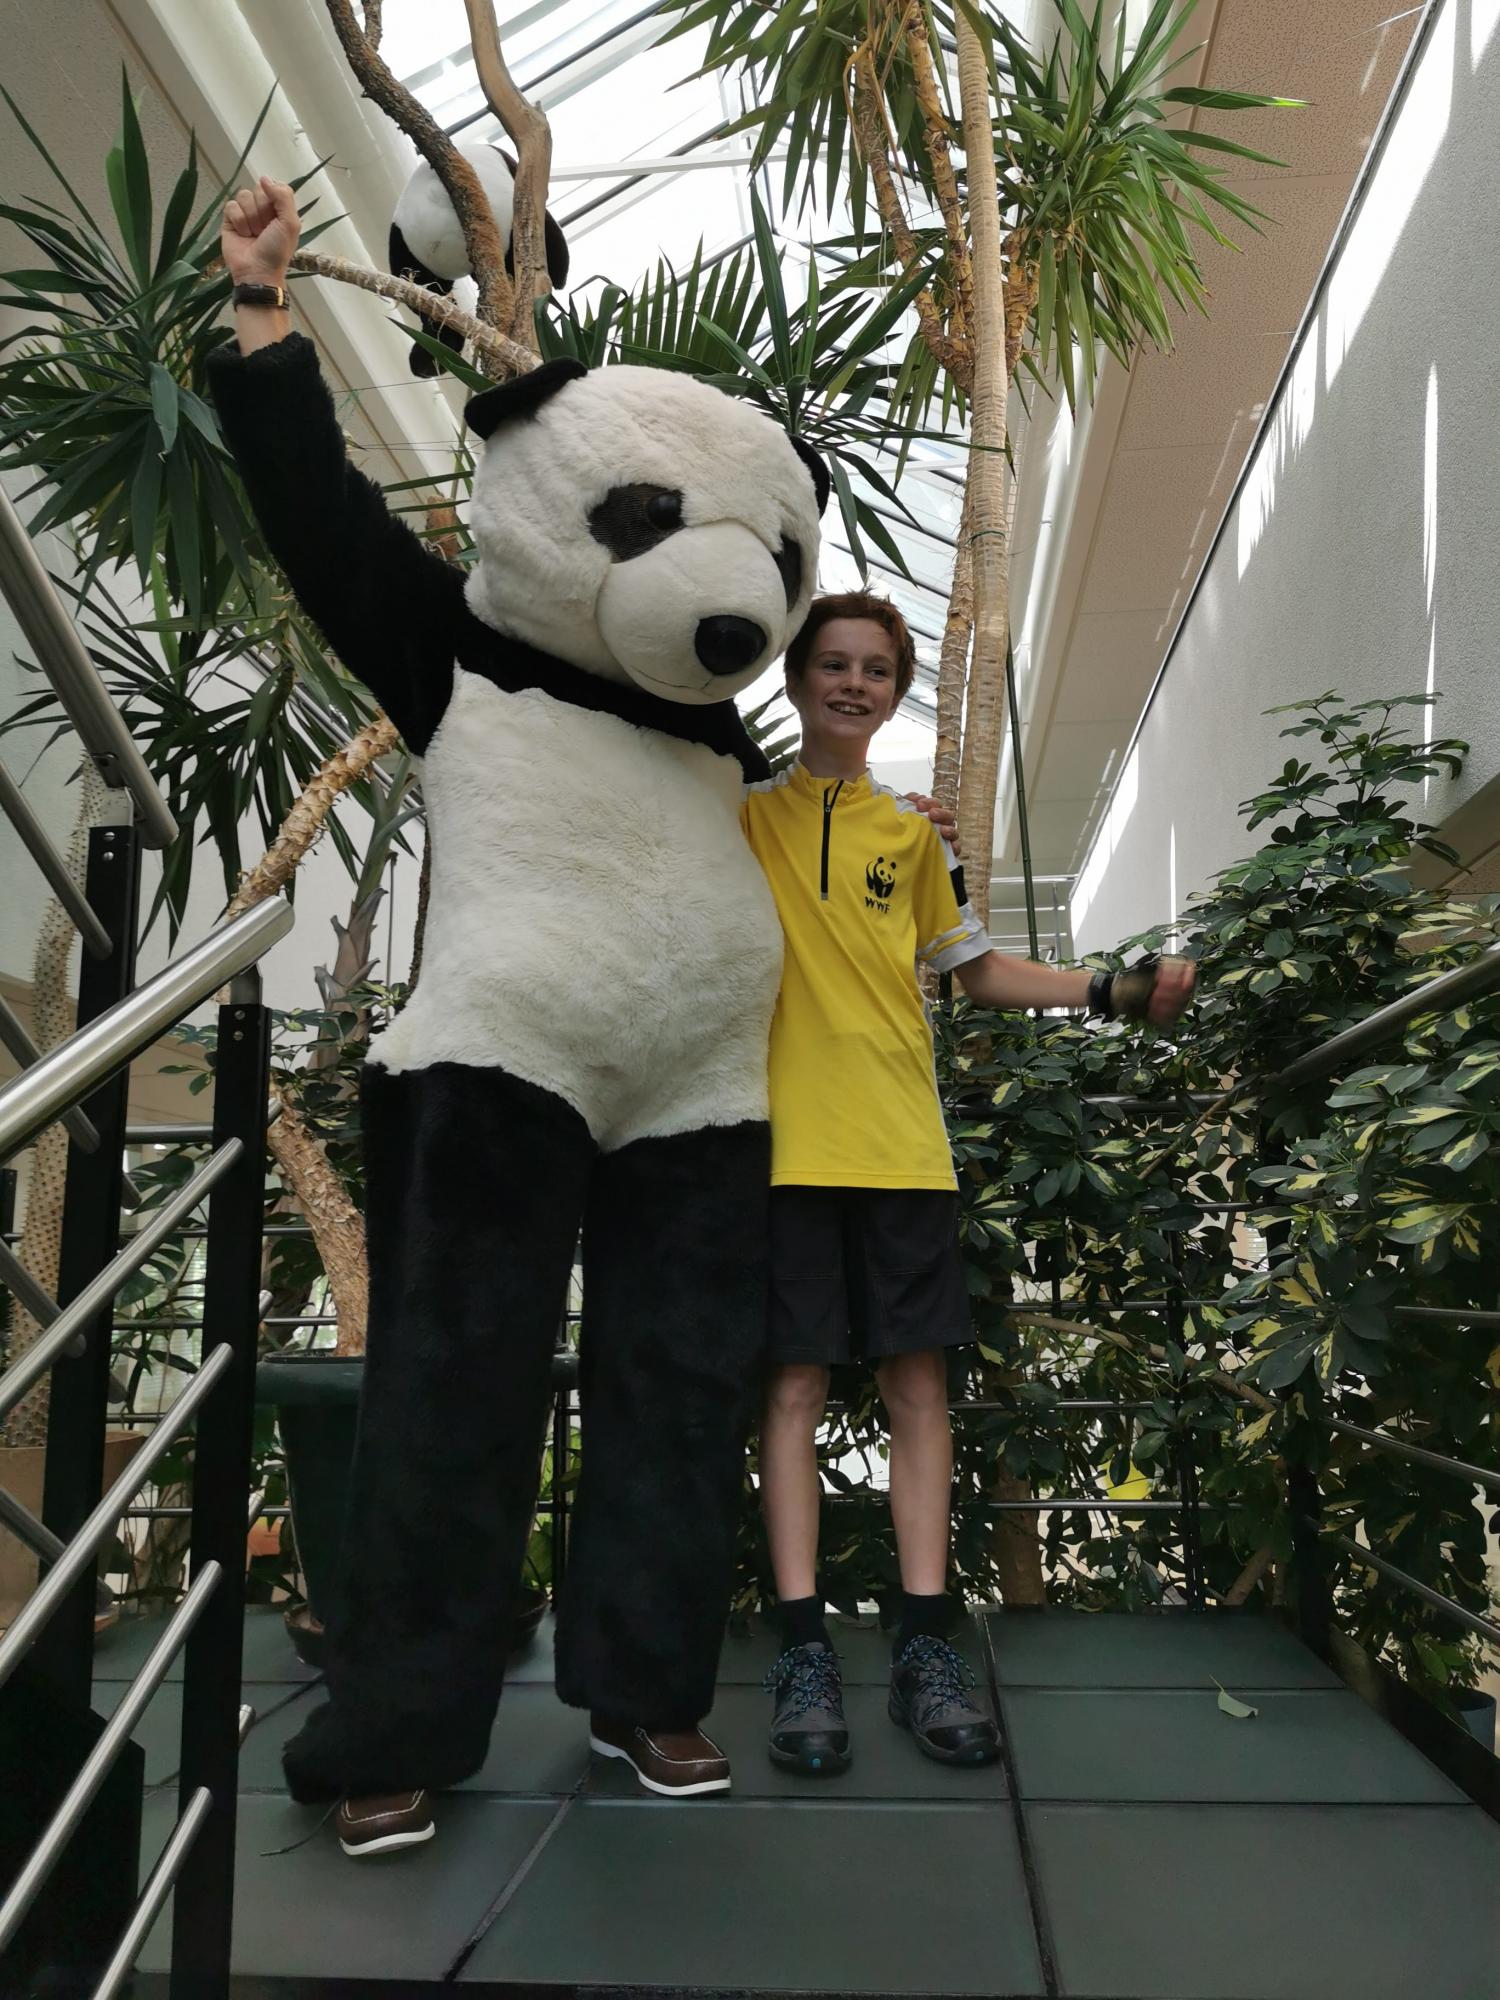 Welcomed by official WWF mascot